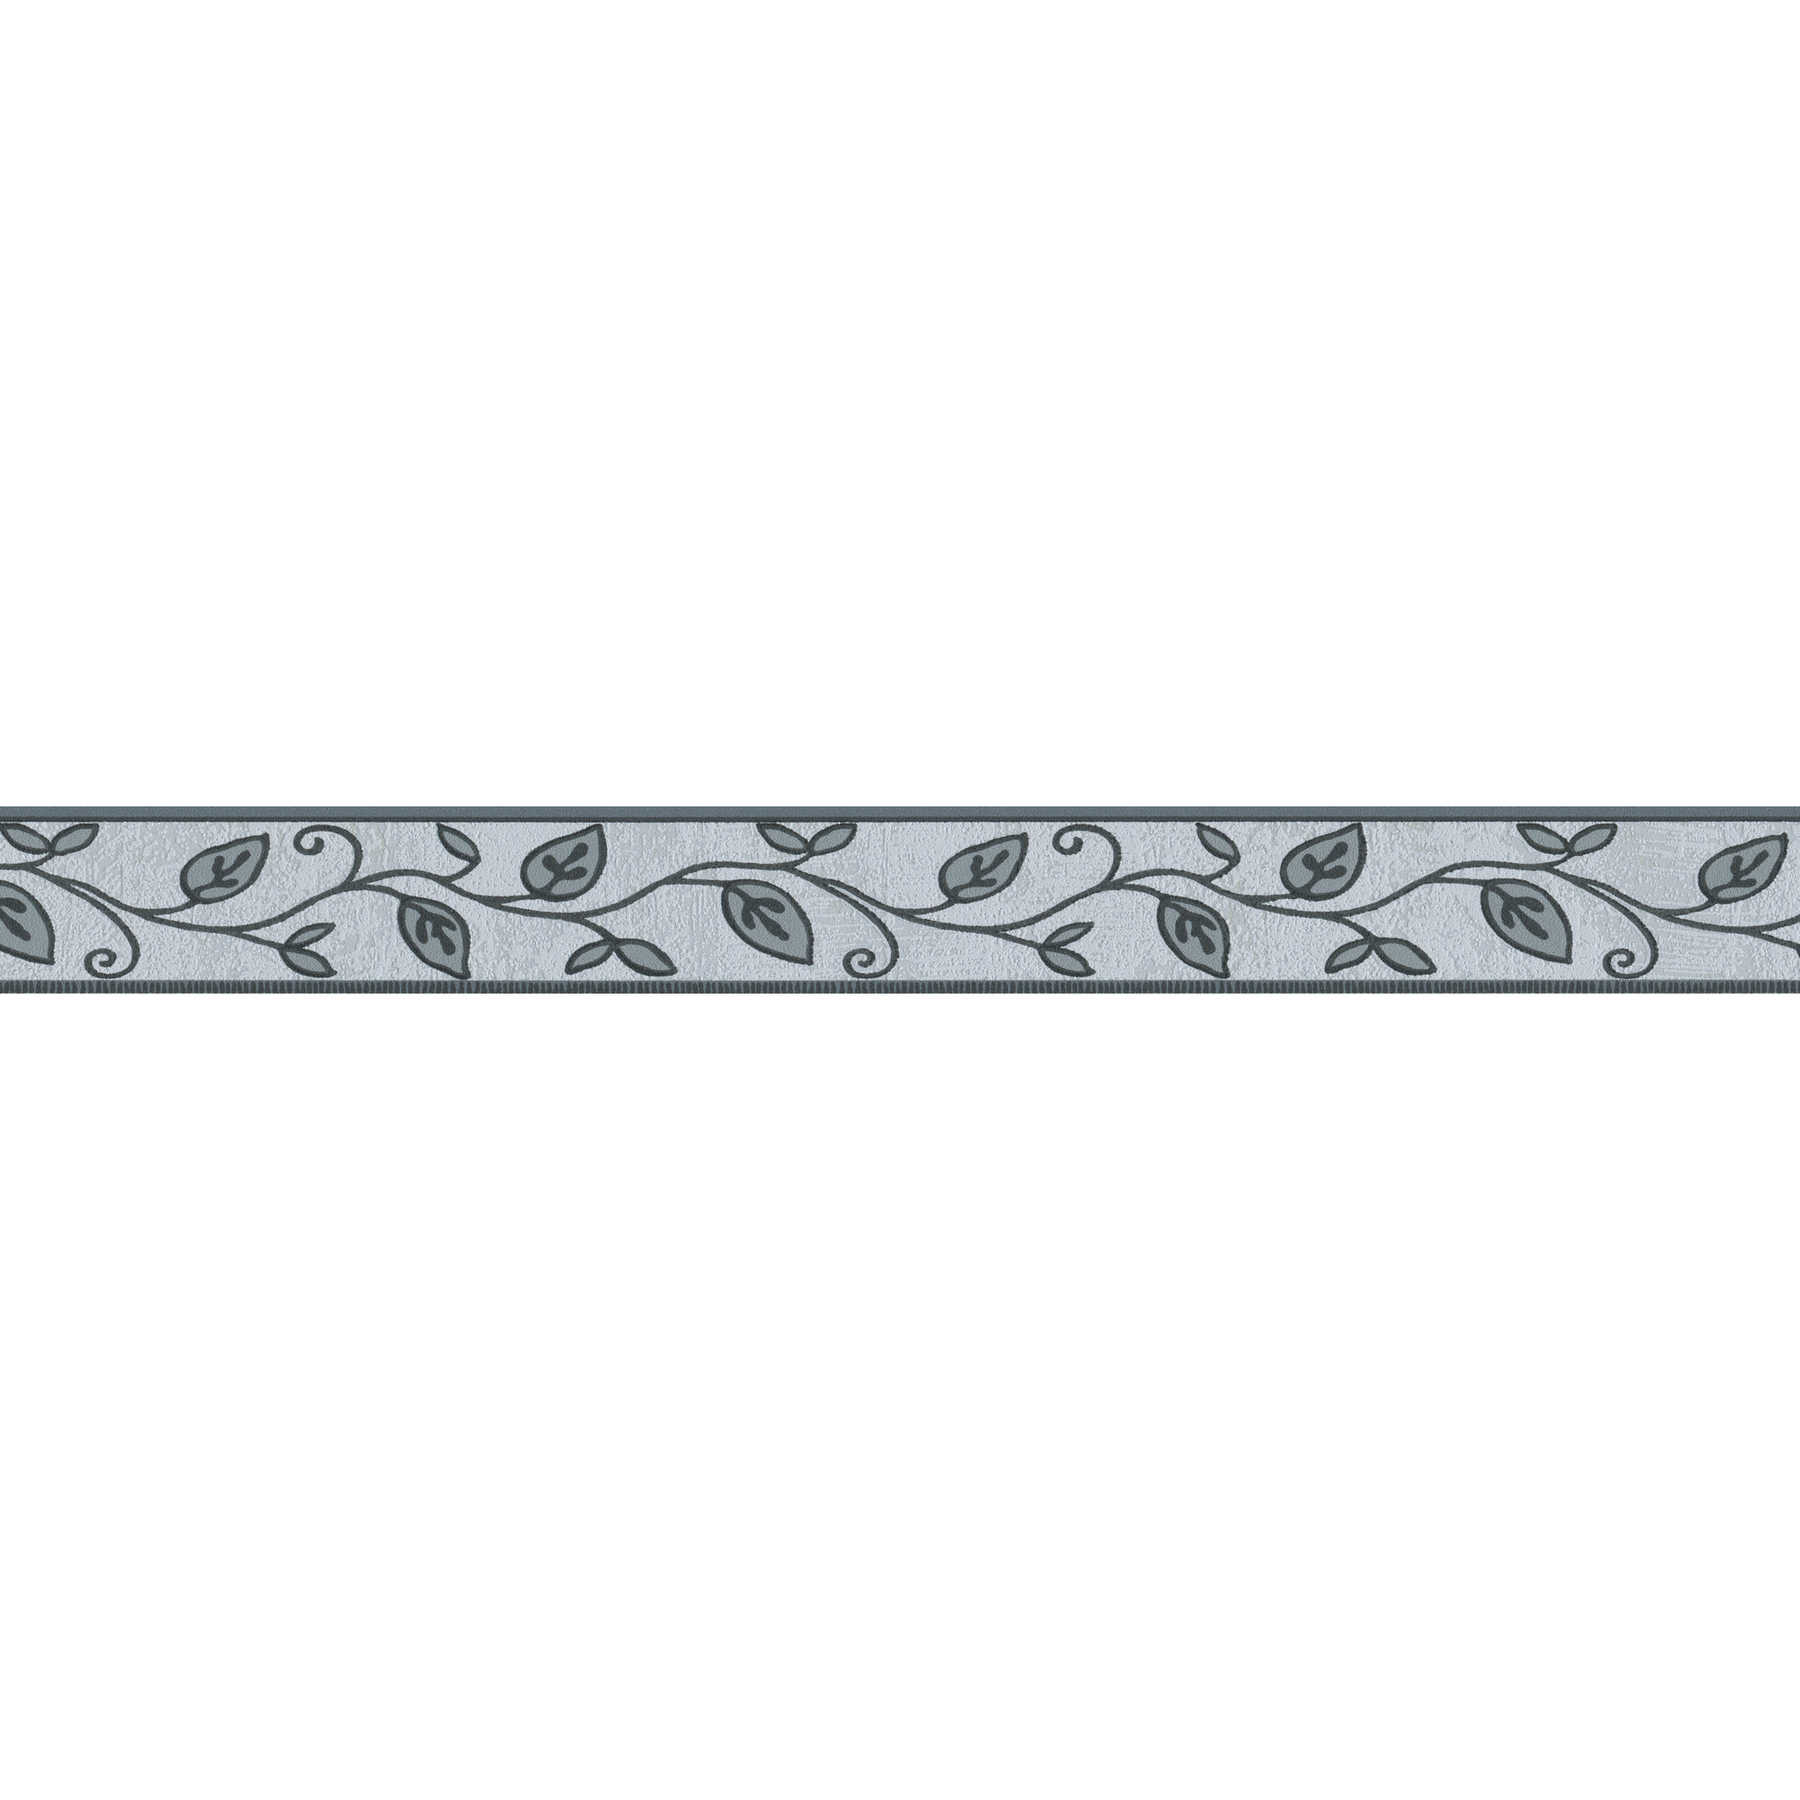         Border with leaf tendrils and textured pattern - Black, Grey
    